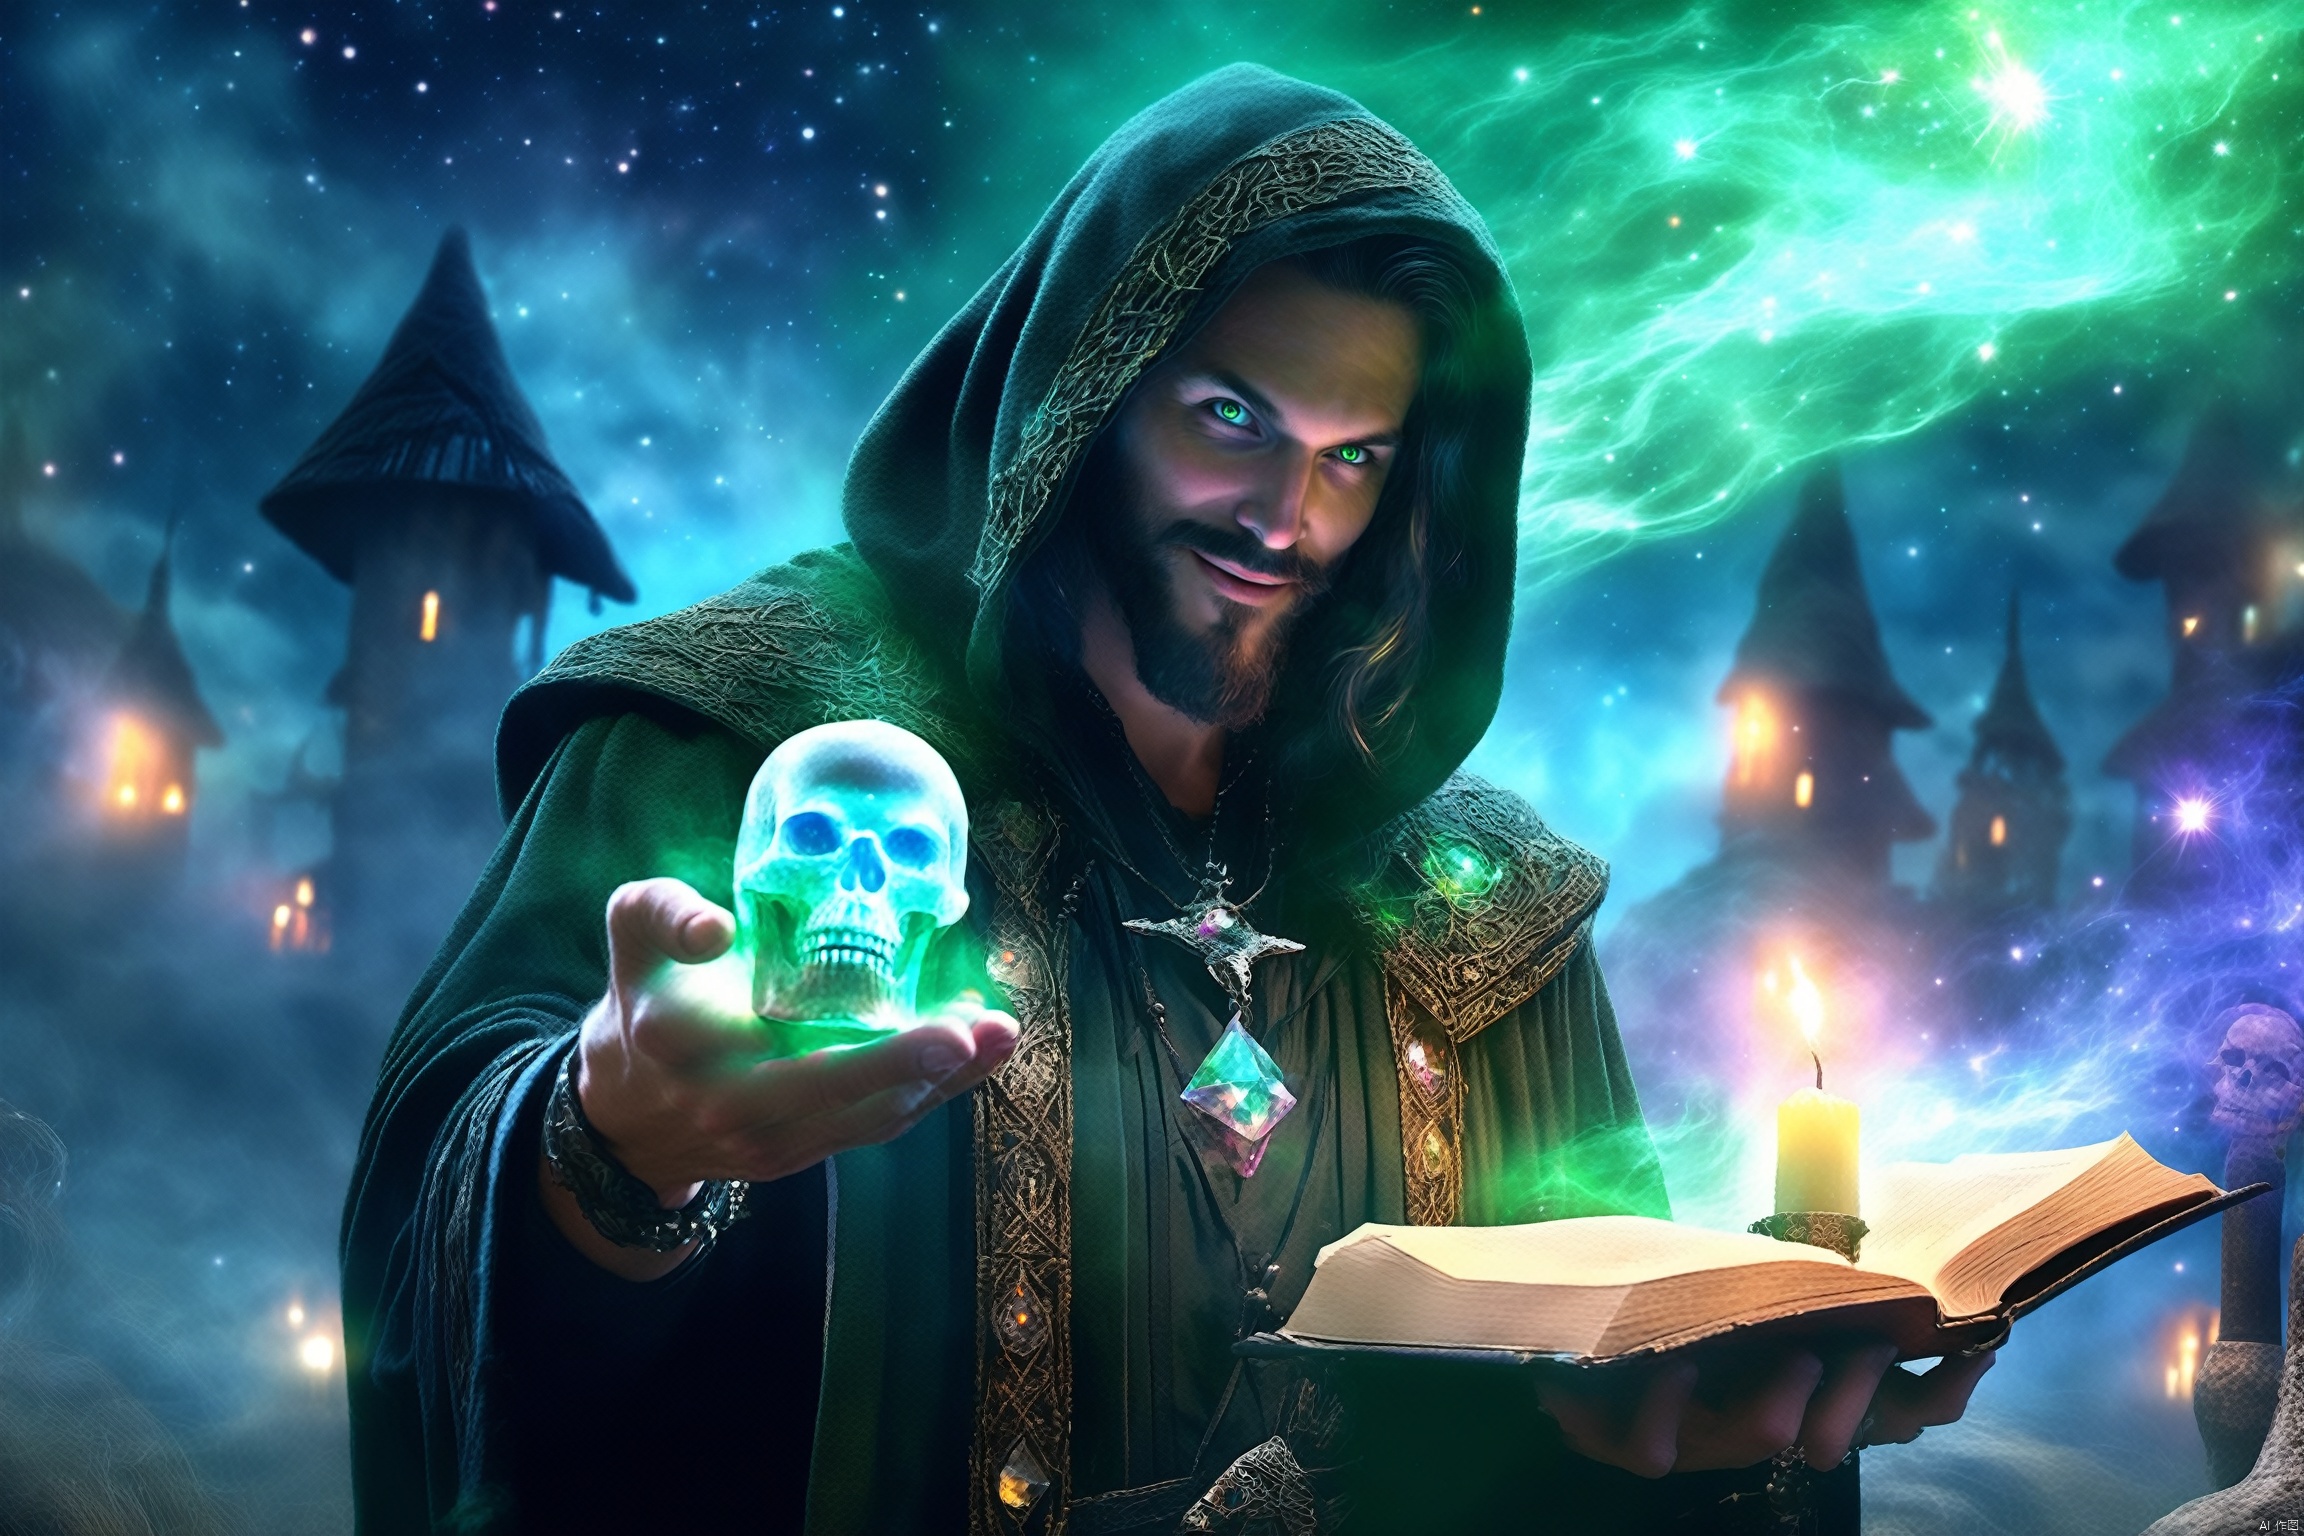 a vicious yet handsome necromancer holding a crystal skull while wielding a glowing magic wand, (looking at viewer:1.2), (evil smile), (hood:1.2), exquisite dark robe with intricate embroidery and mysteriou runes, facial hair, outdoors, green fog, in a ritual site, skeleton, books, starry night, (gloomy ambience), candle lighting, light splash, ethereal, mysterious, (fantasy aura)